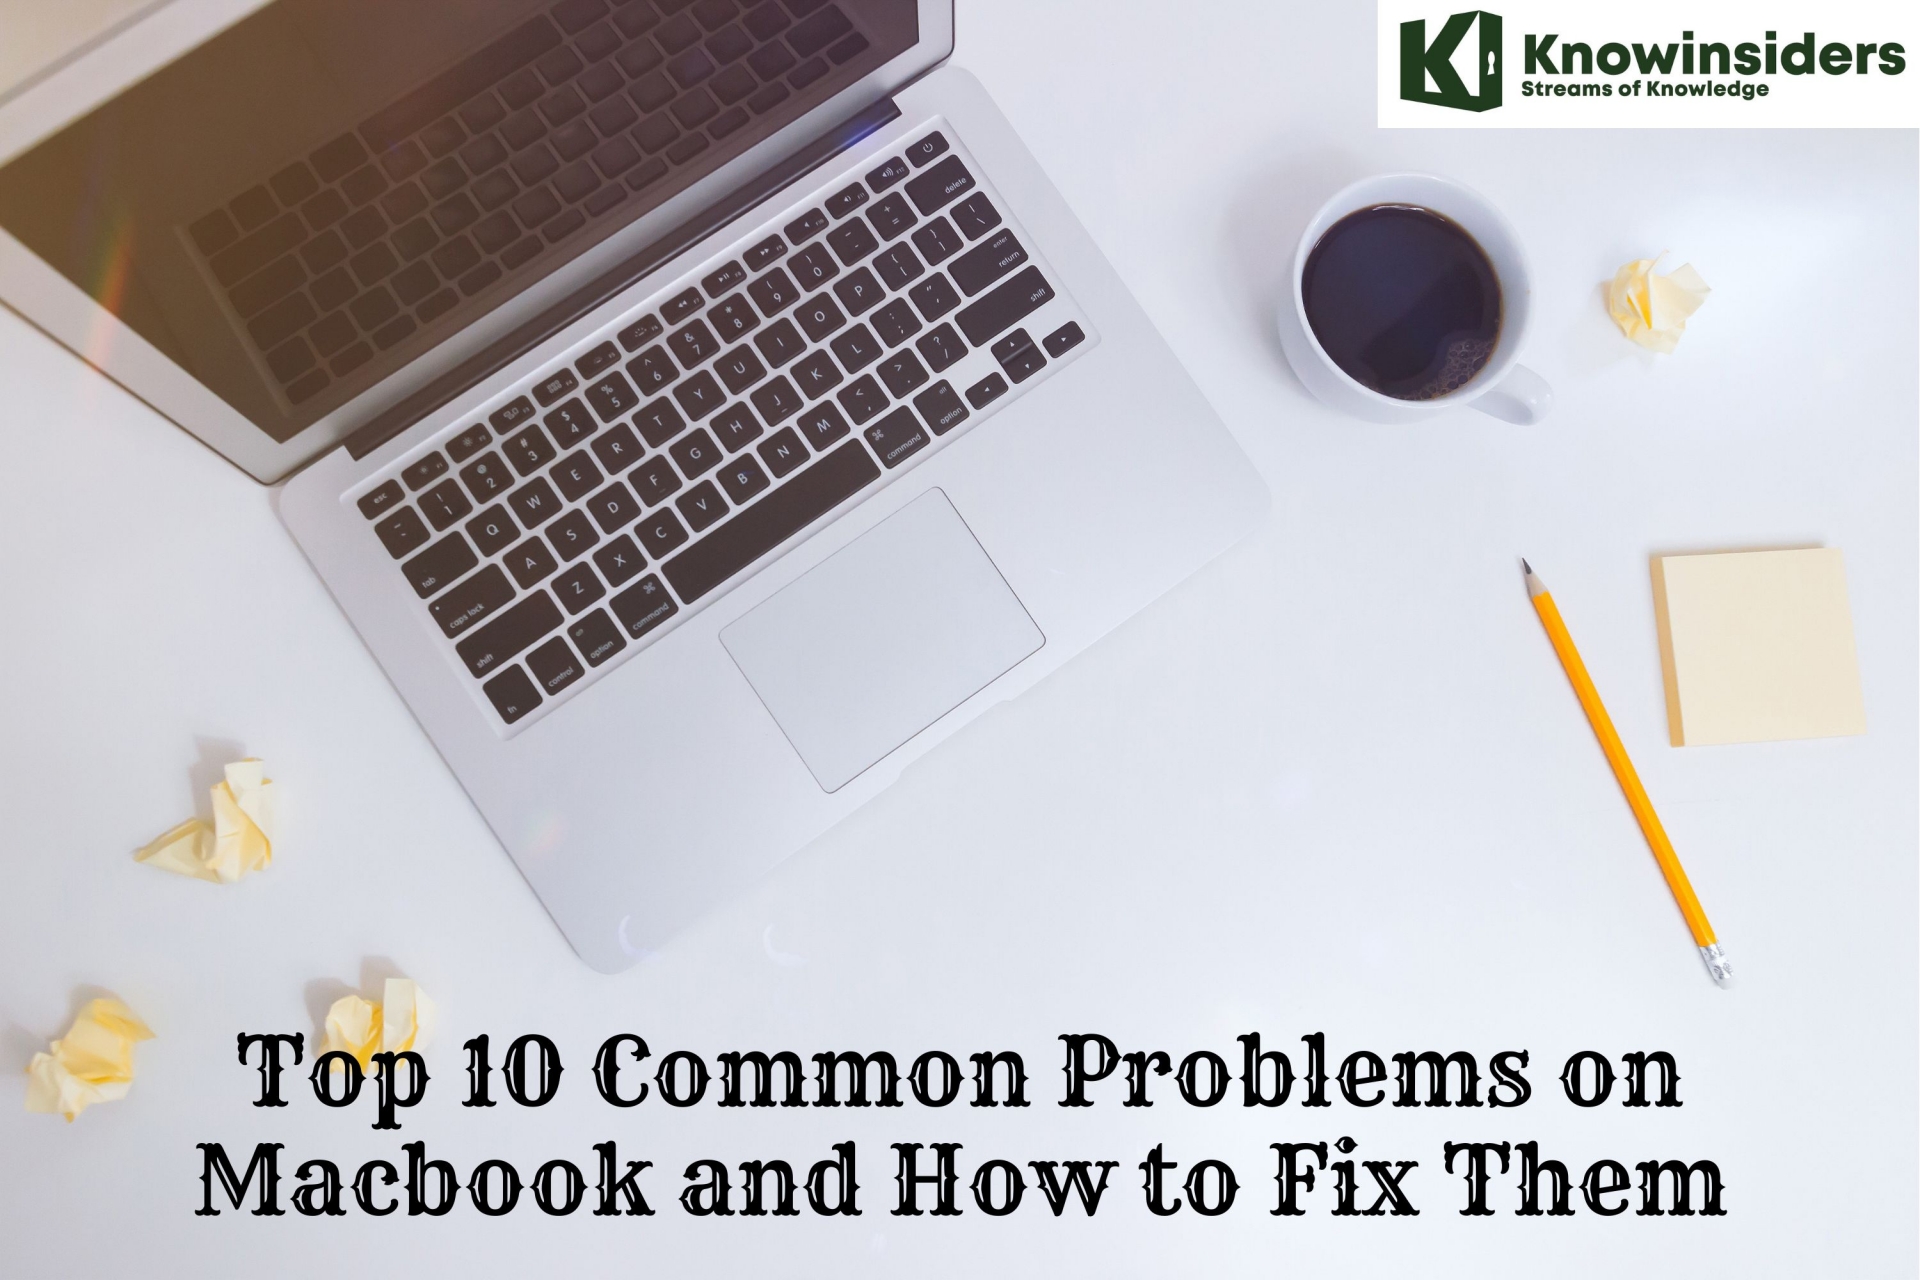 Top 10 Common Problems on Macbook and How to Fix Them